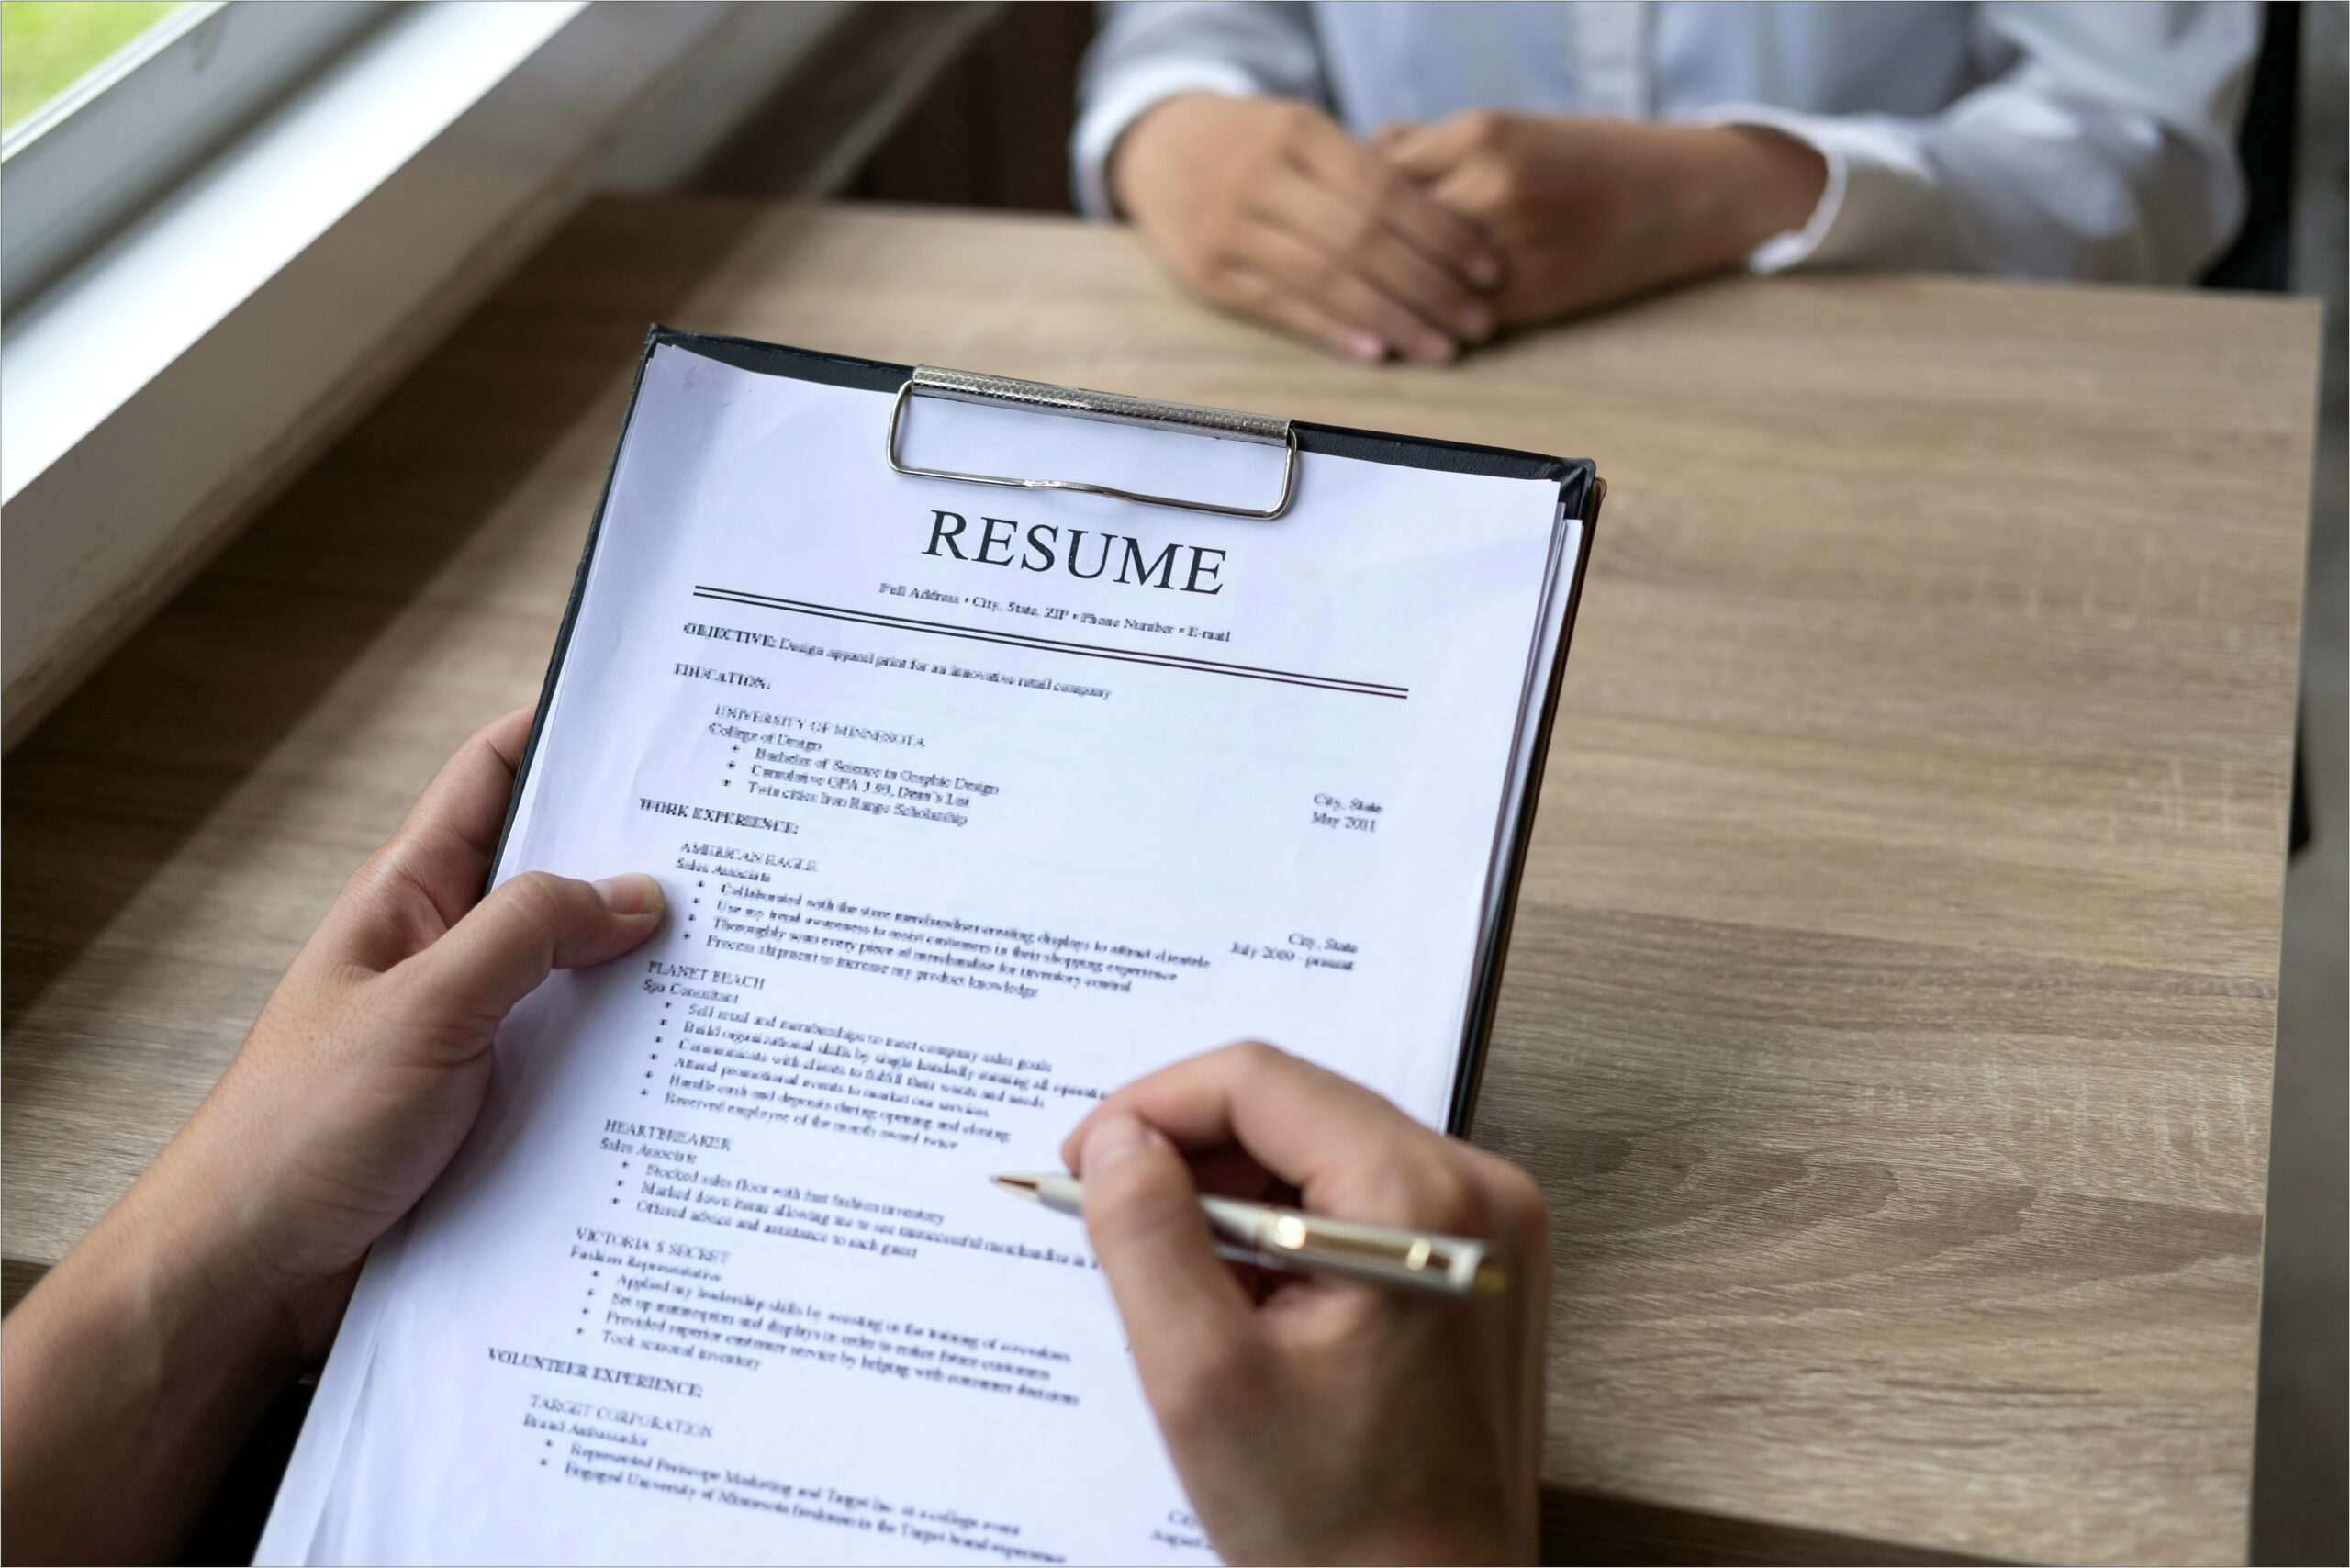 Where To Put Graduation Date On Resume